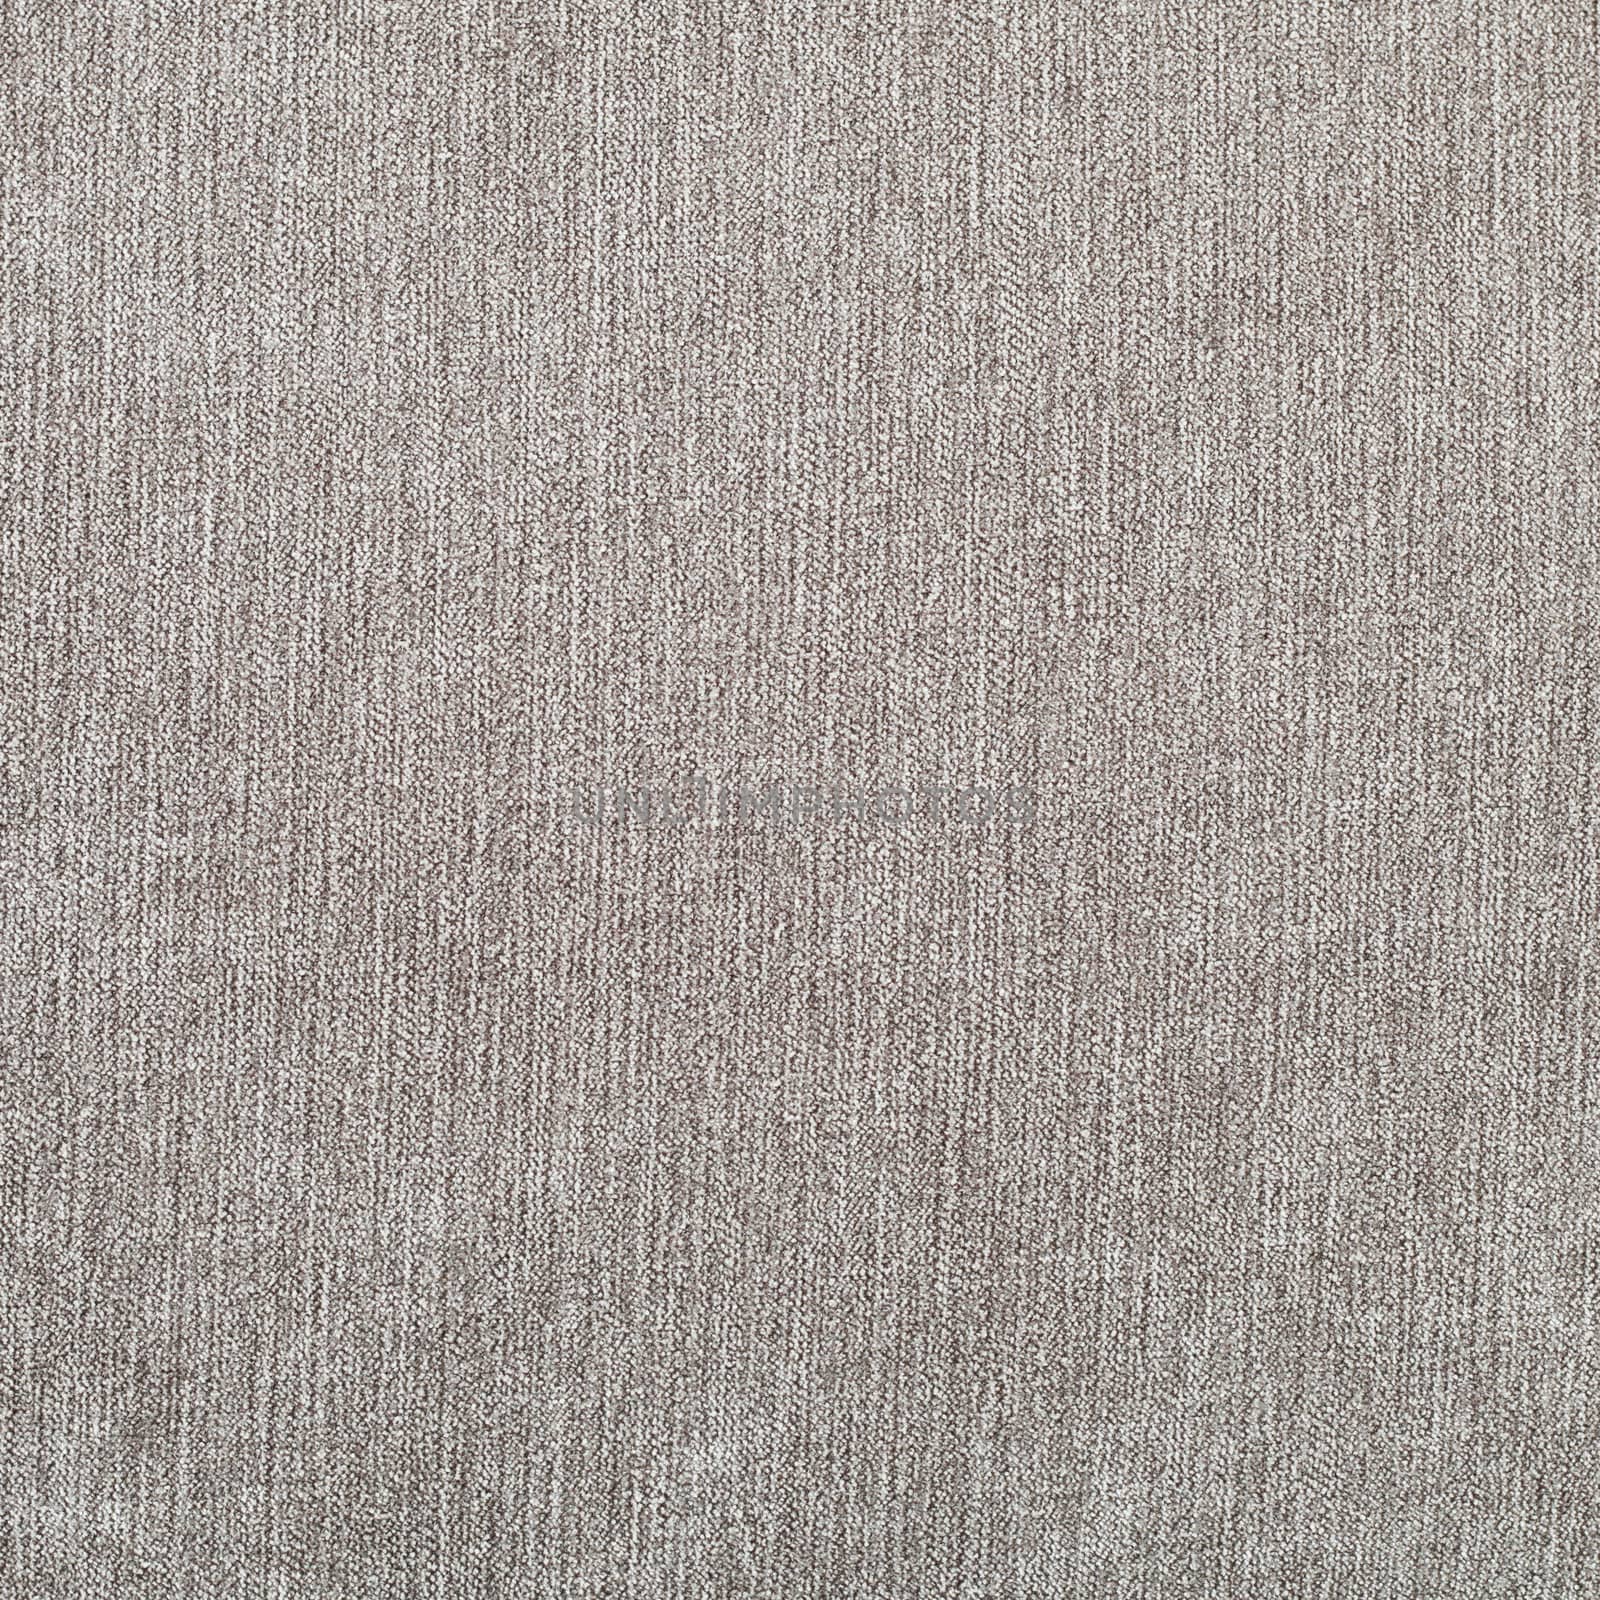 brown moleskin material as a background image